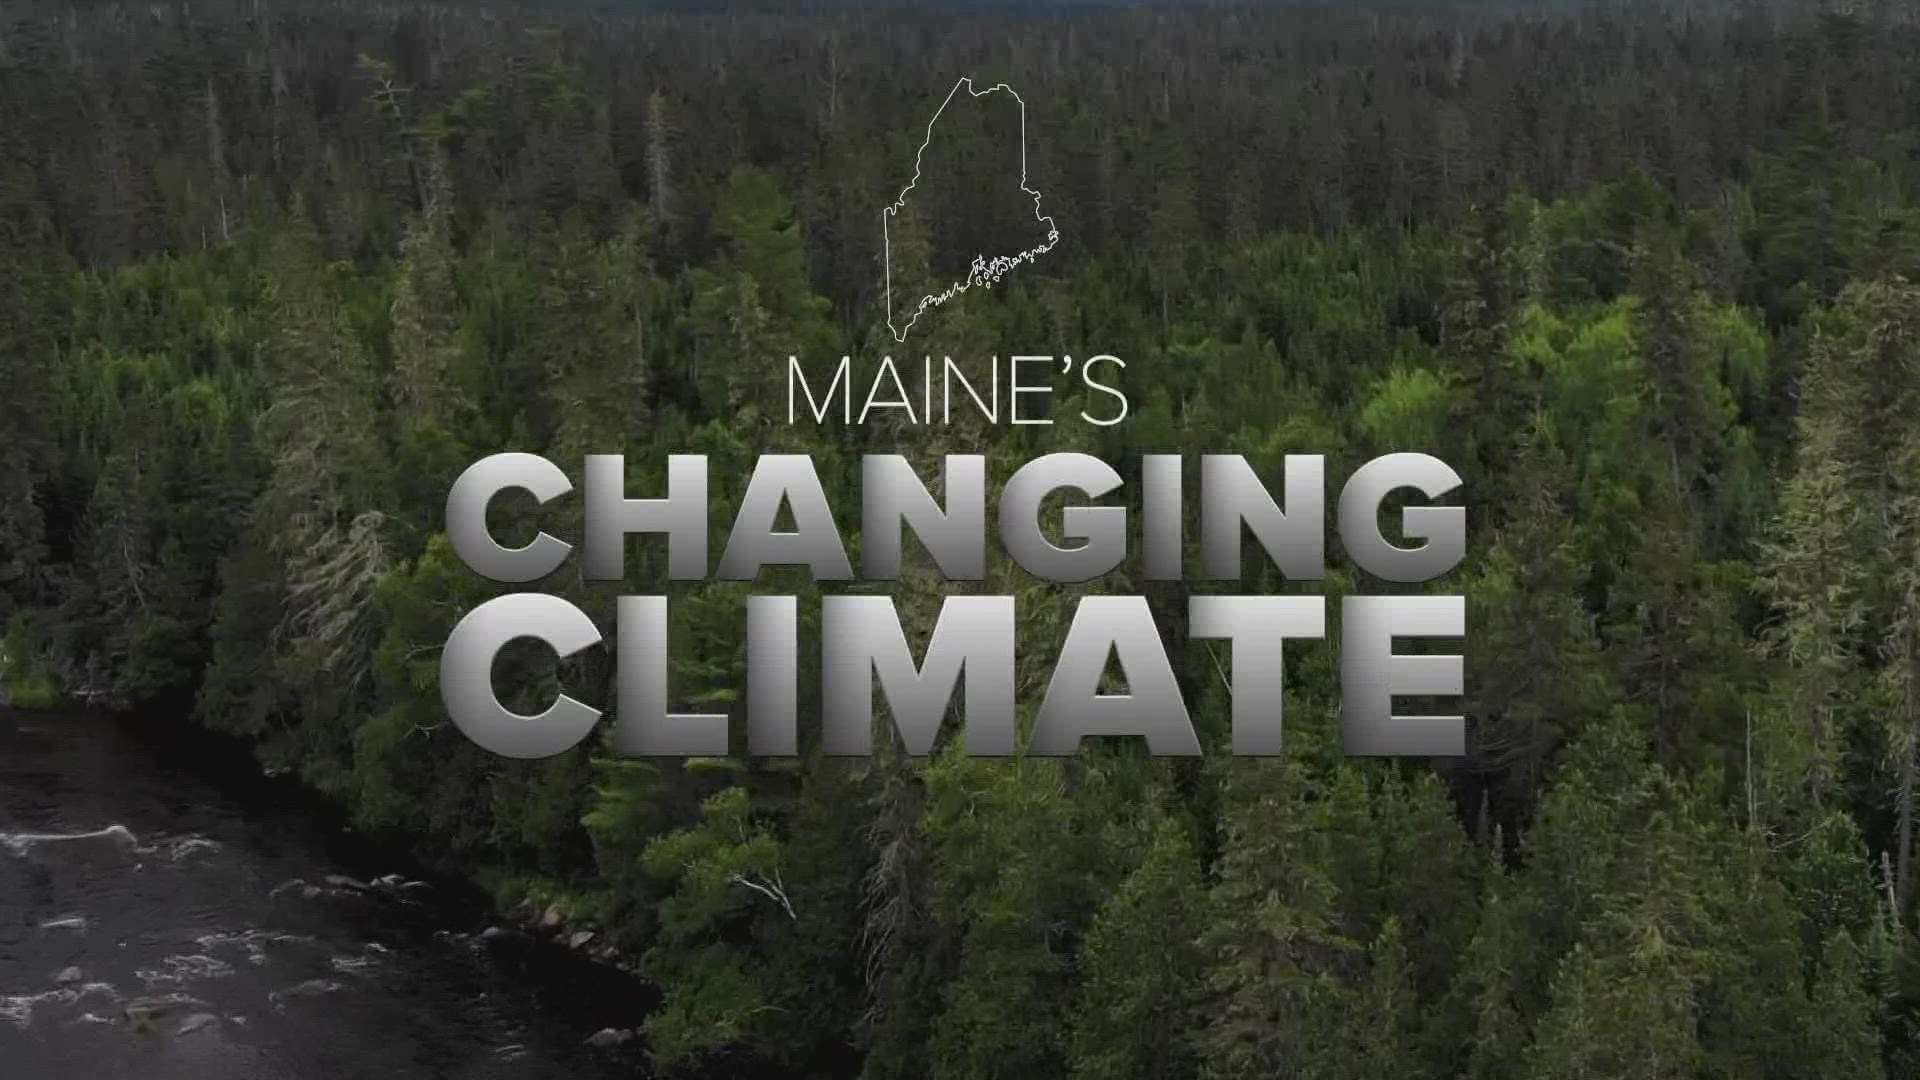 Watch NEWS CENTER Maine's special report on our state's changing climate.